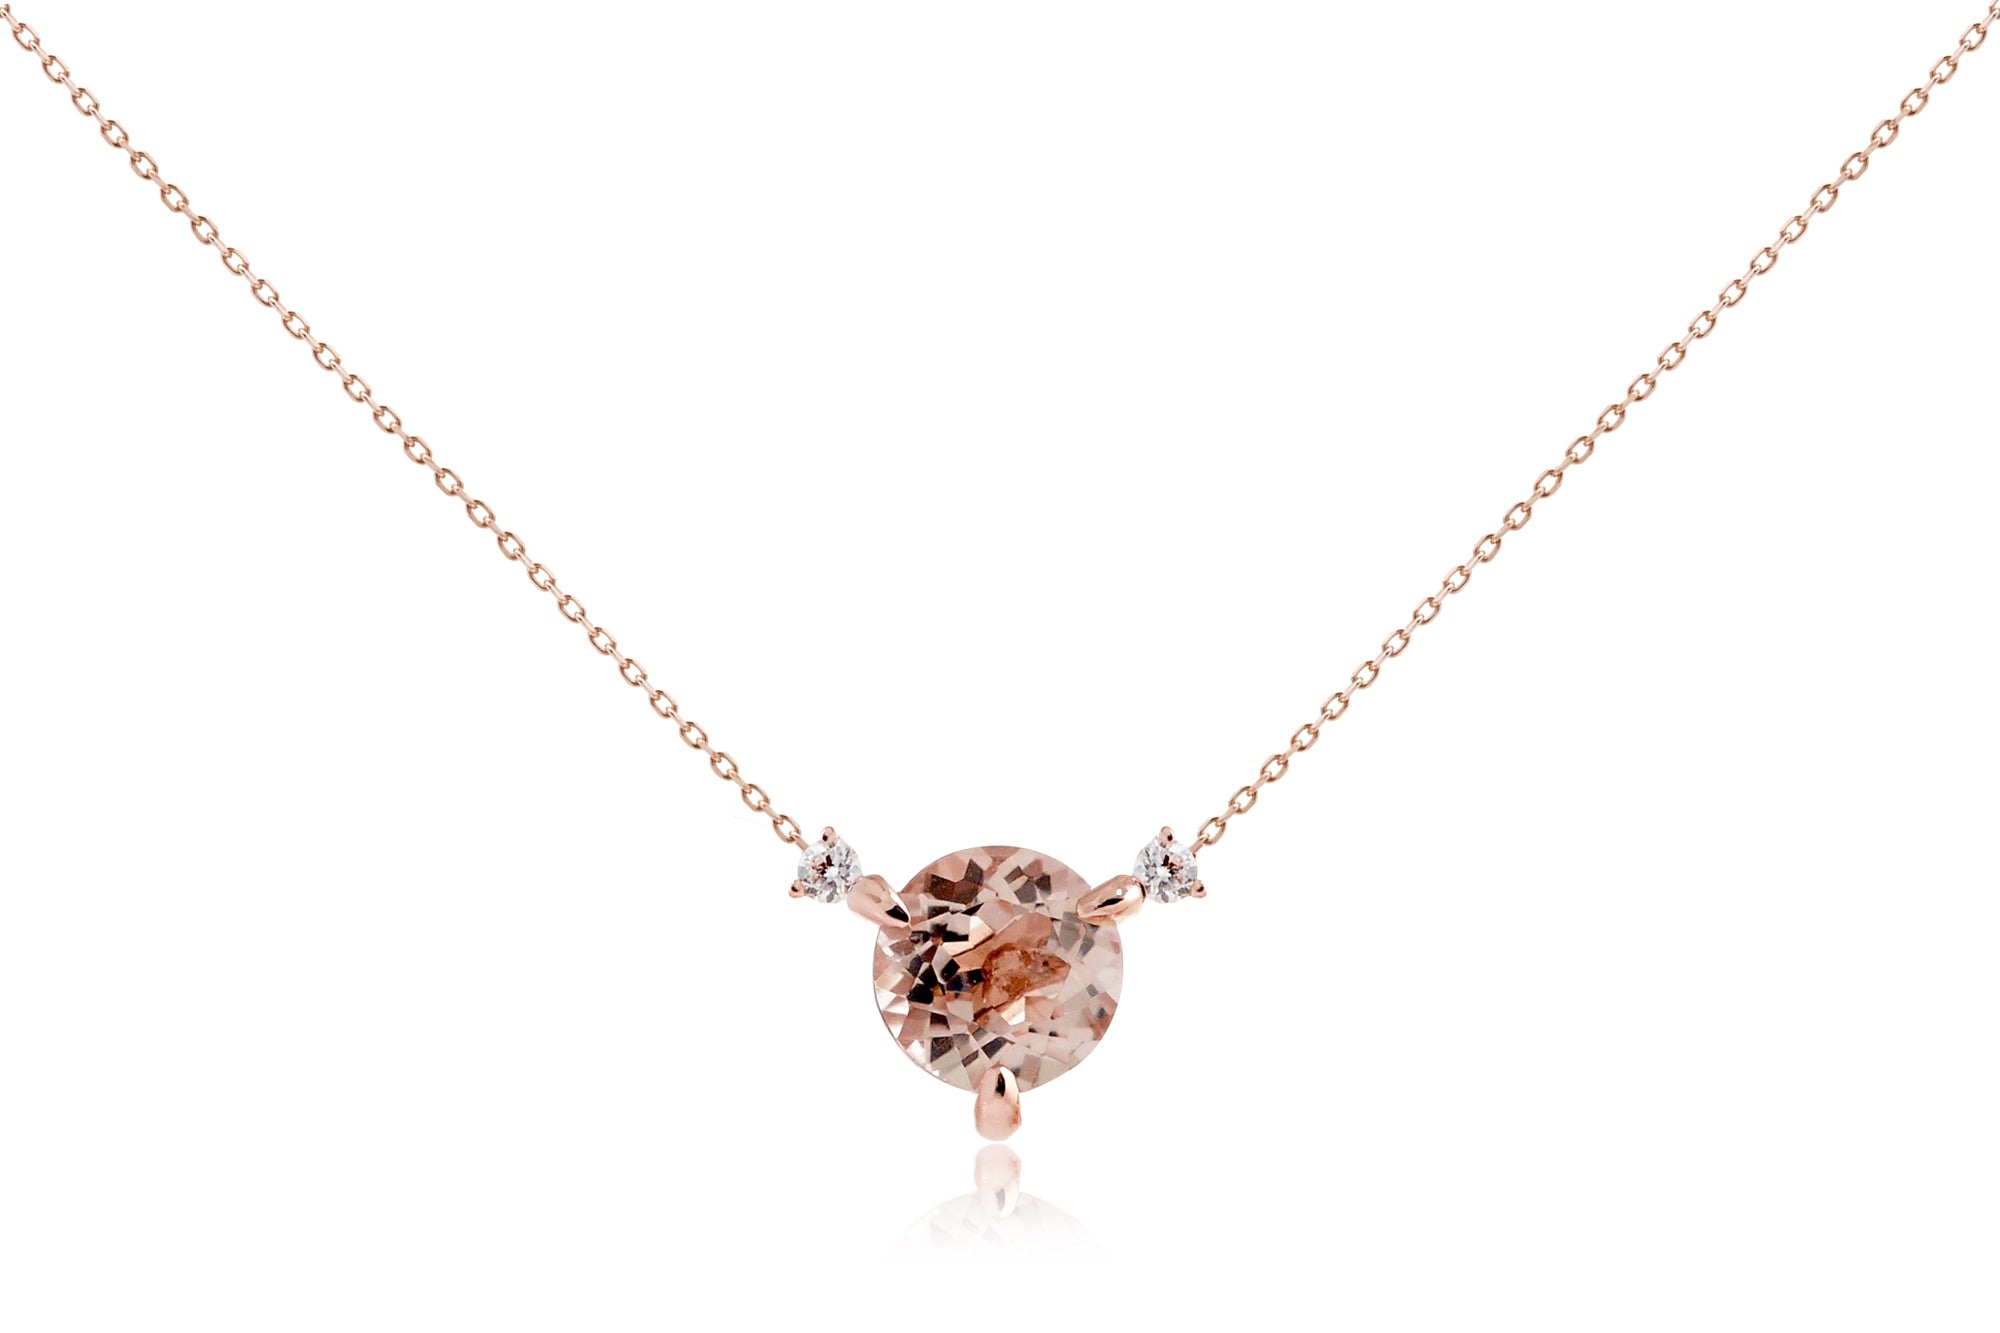 The Mandy Round Morganite Necklace